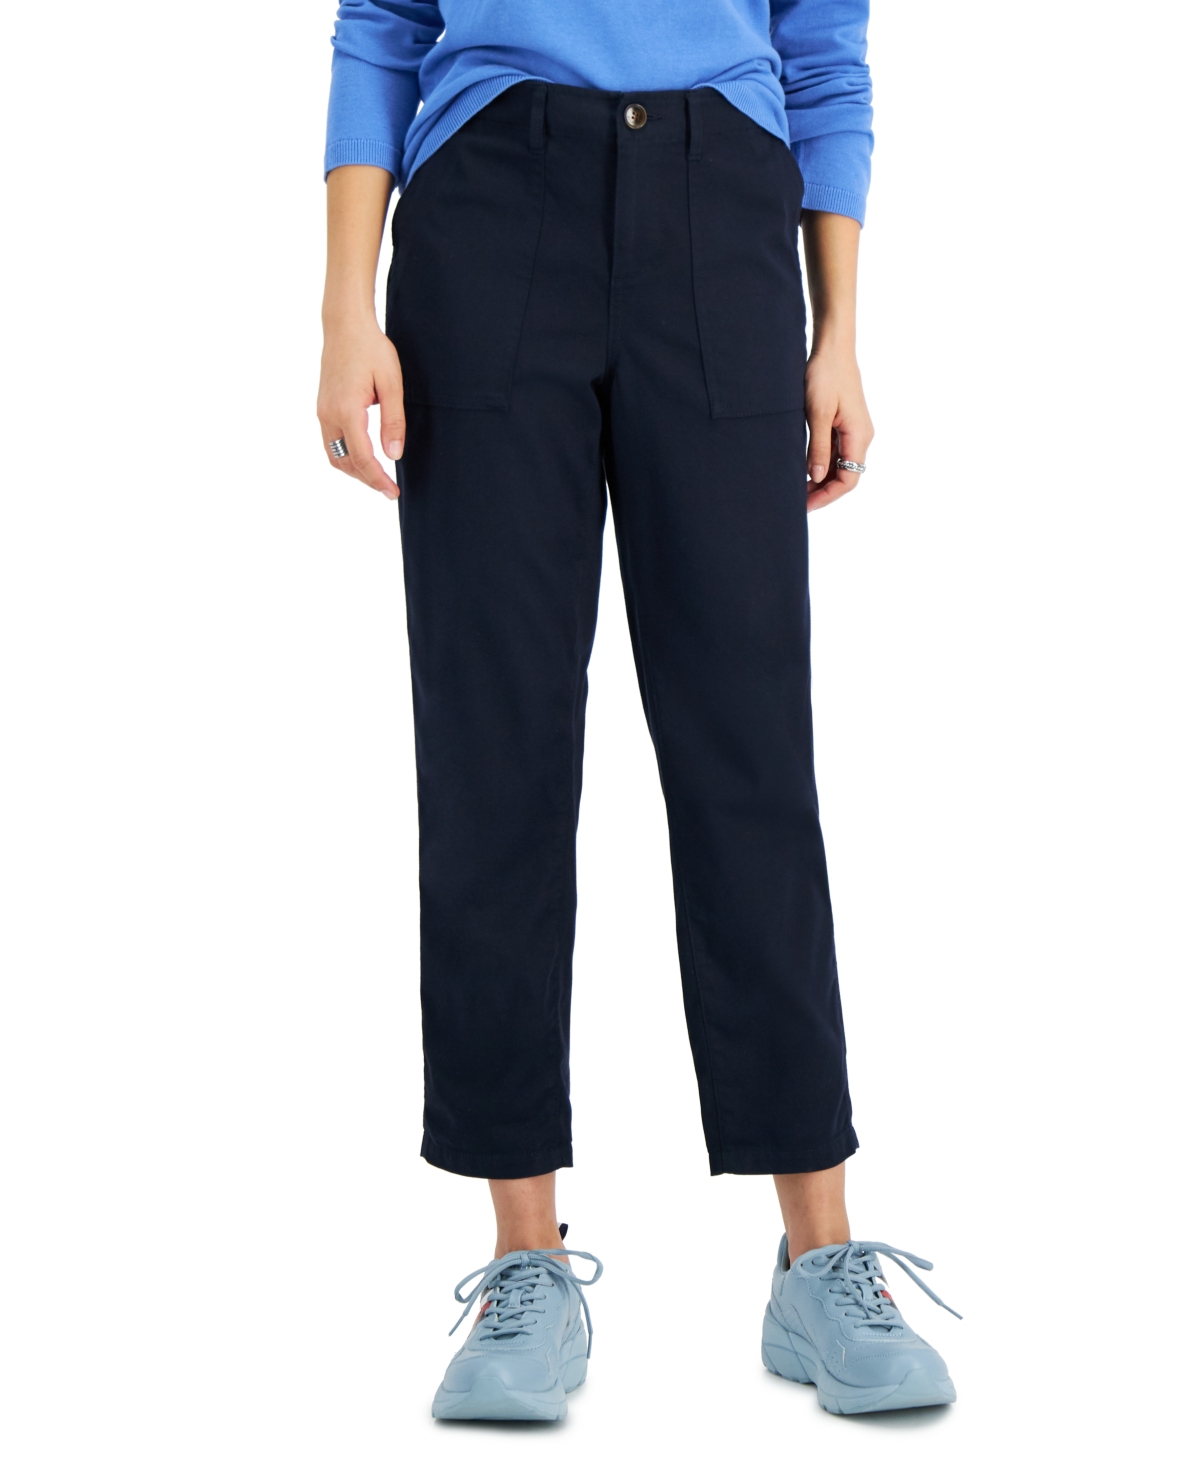 Tommy Hilfiger Women's Solid Cropped Utility Pants